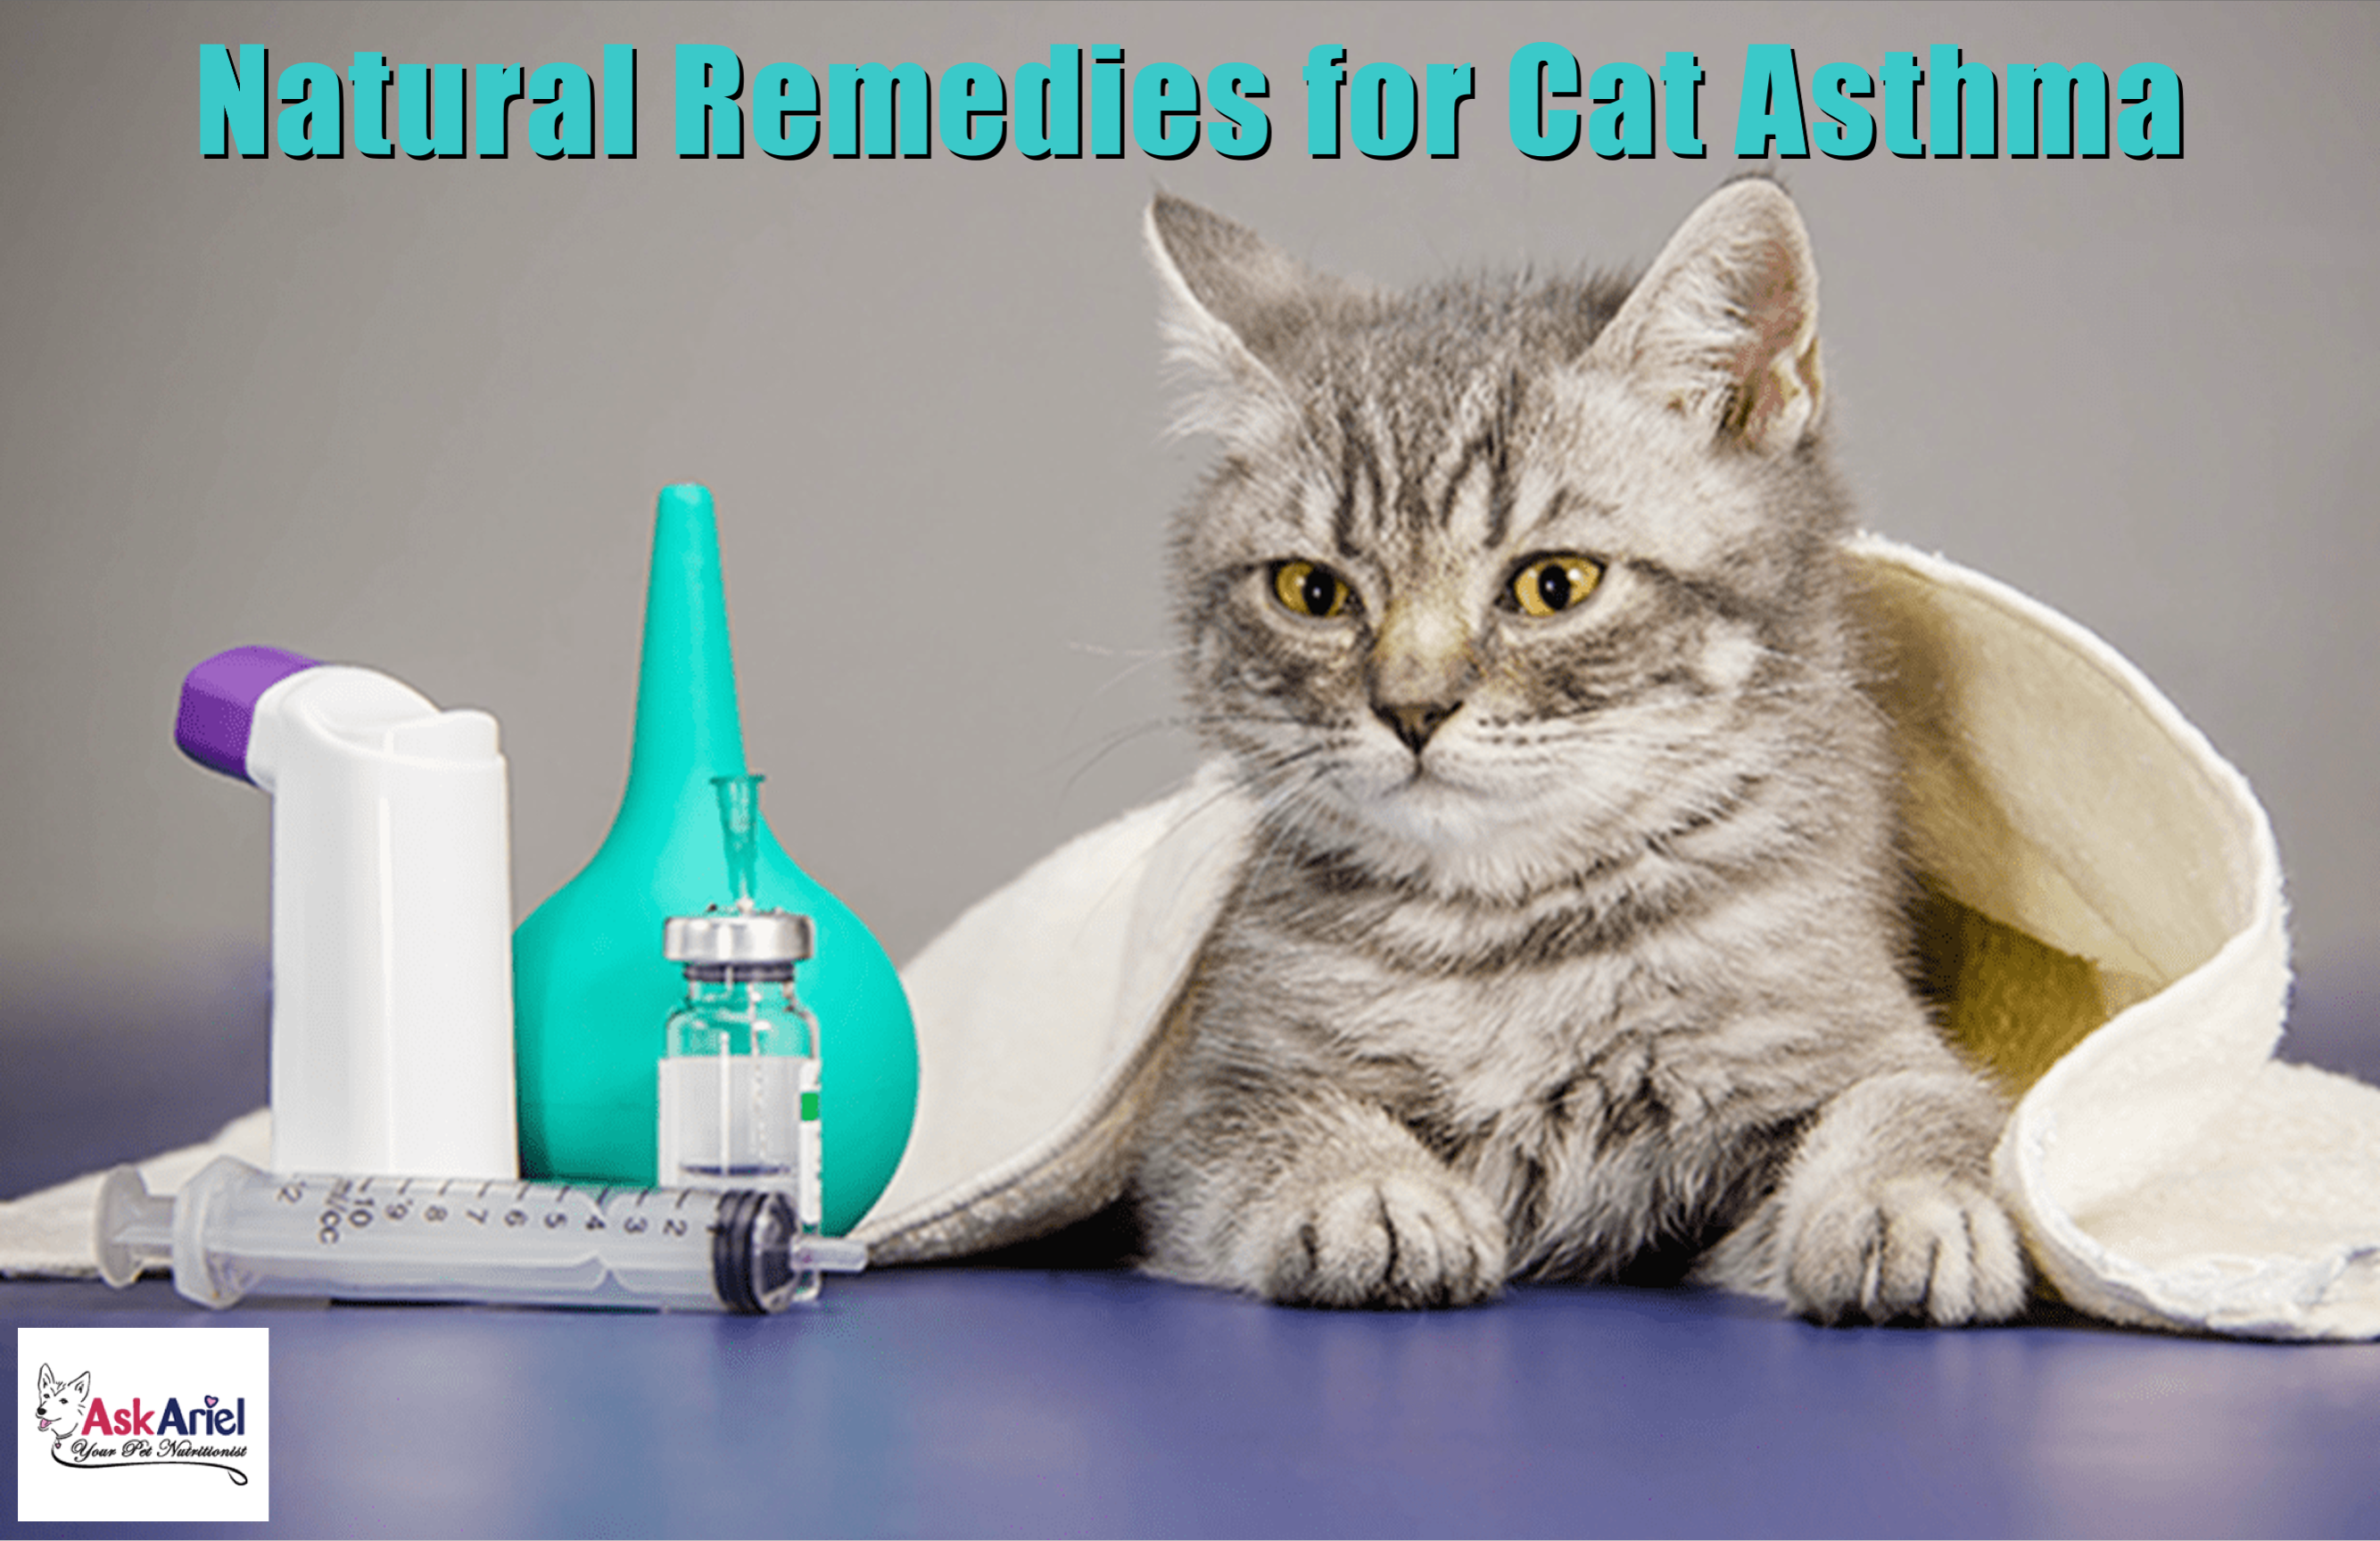 Can Cats Have Asthma?